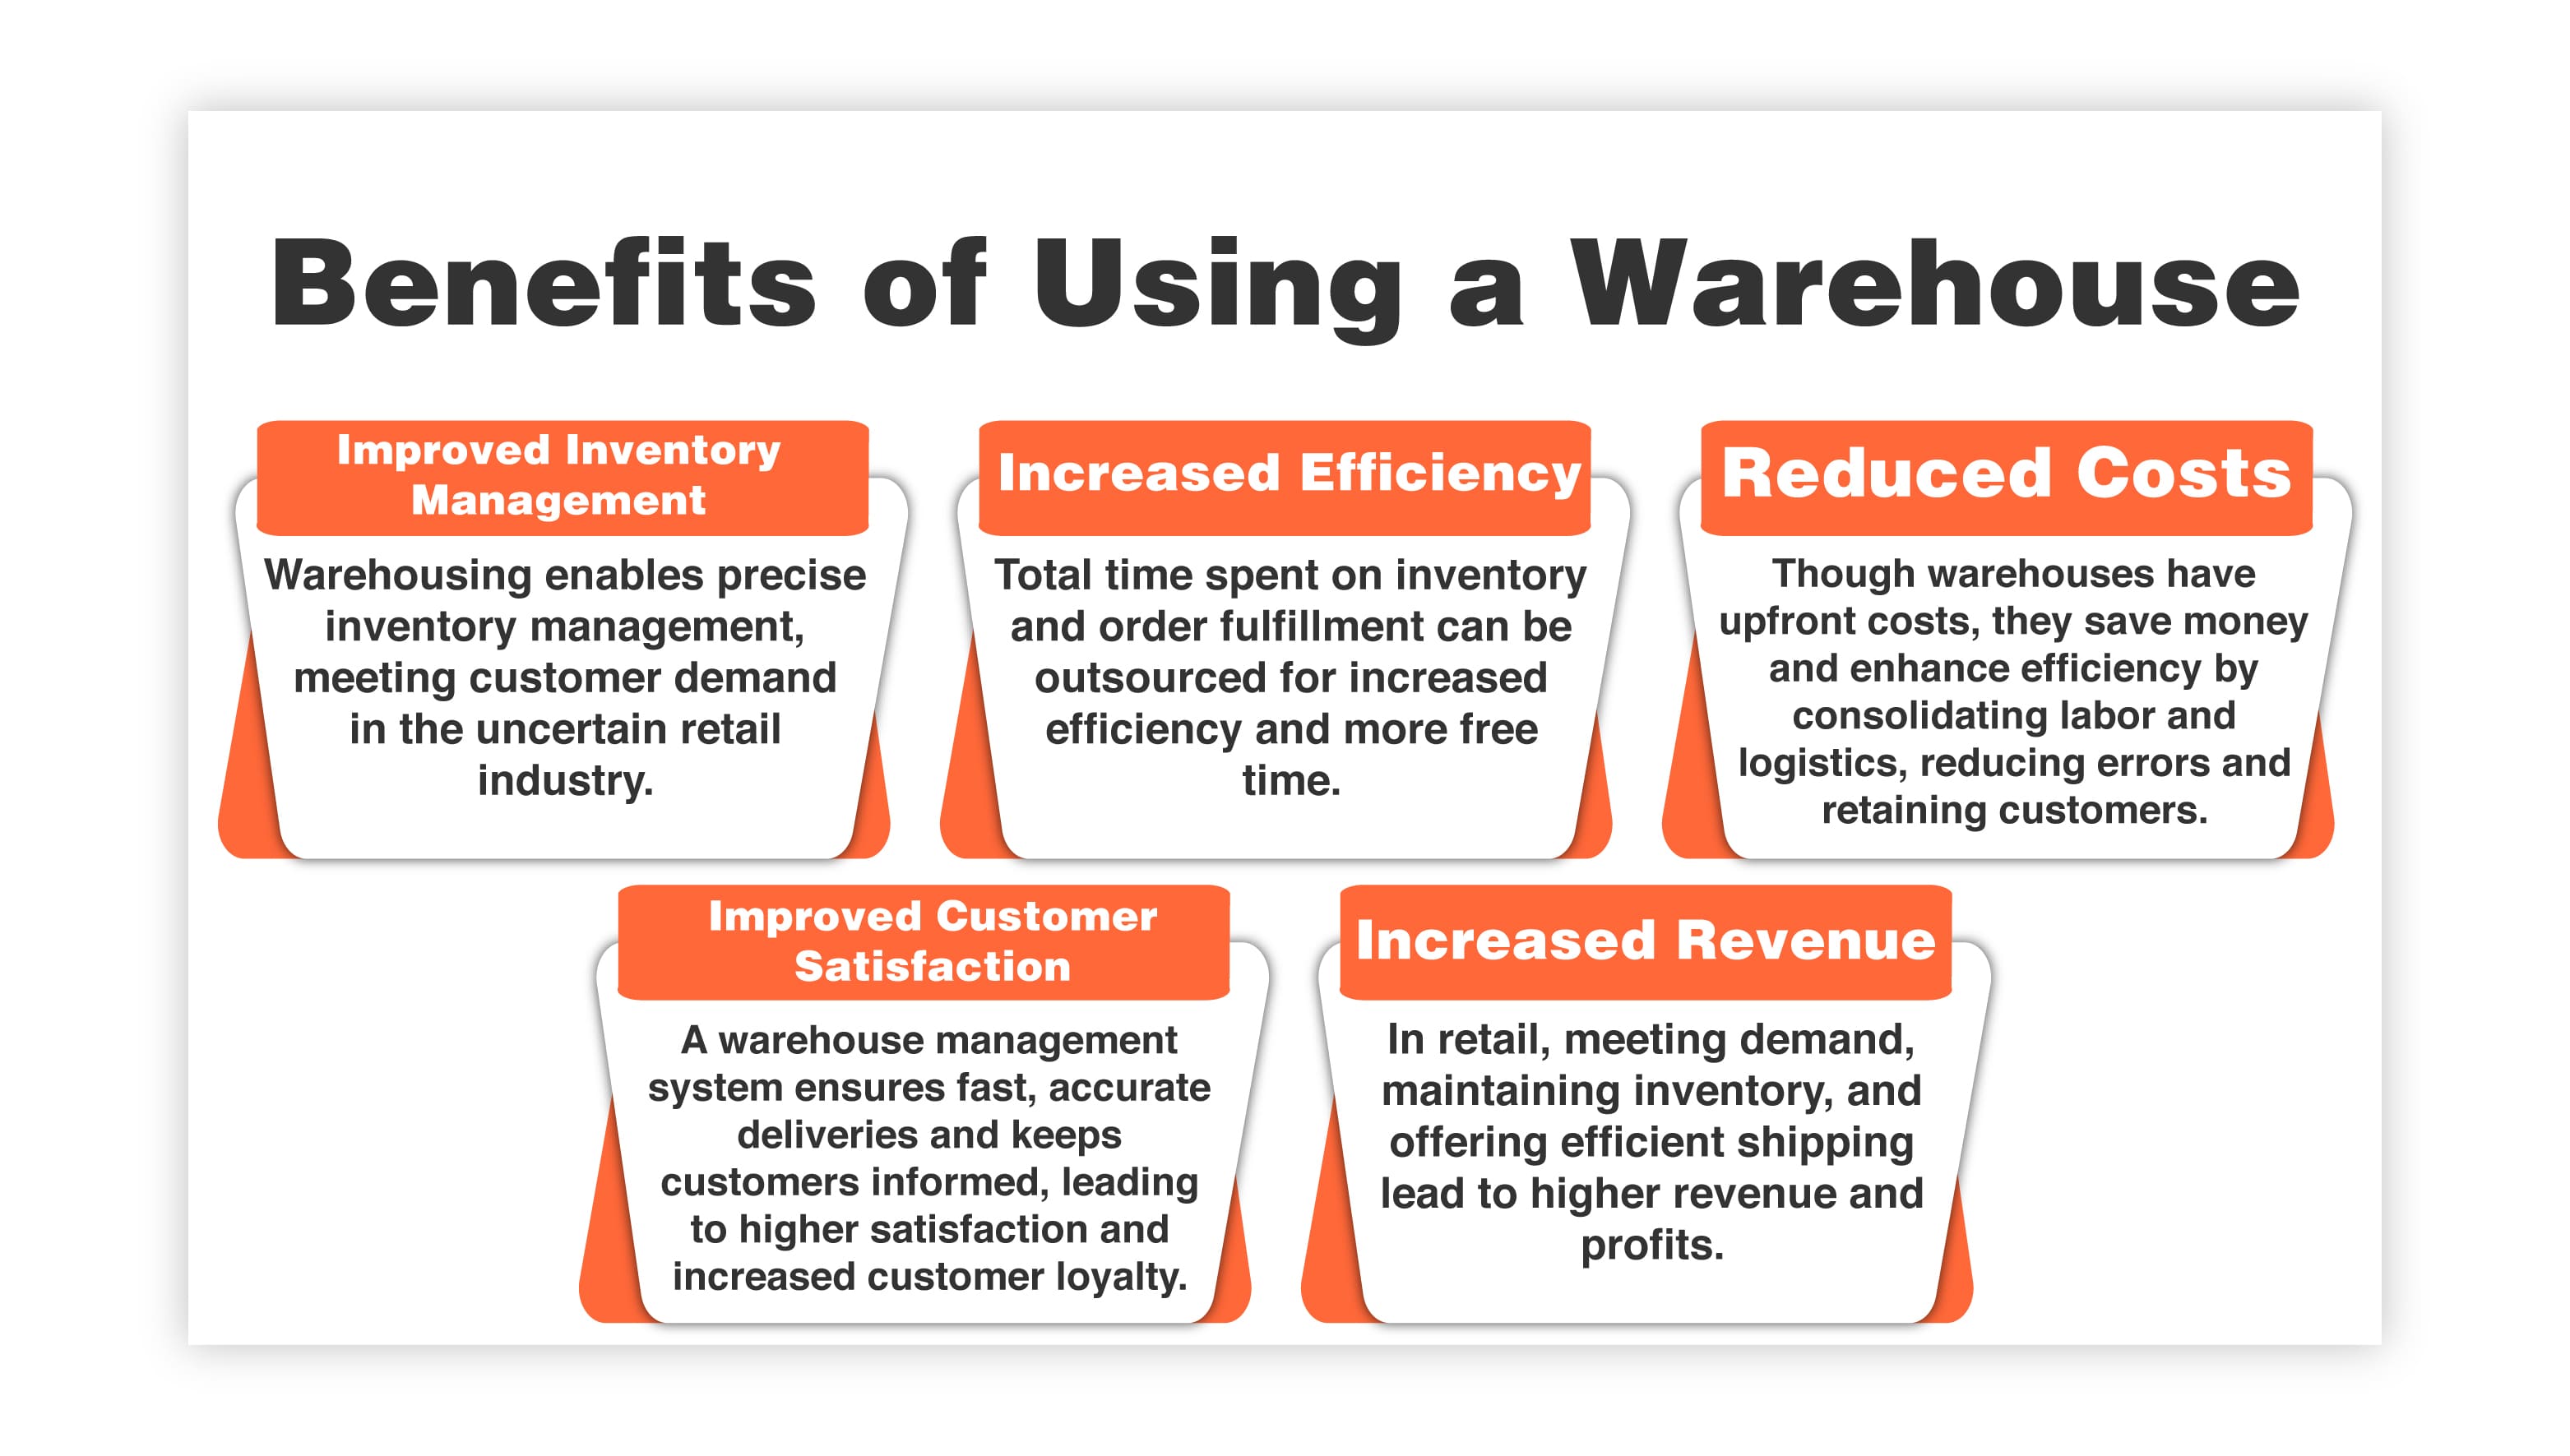 Benefits of Using a Warehouse